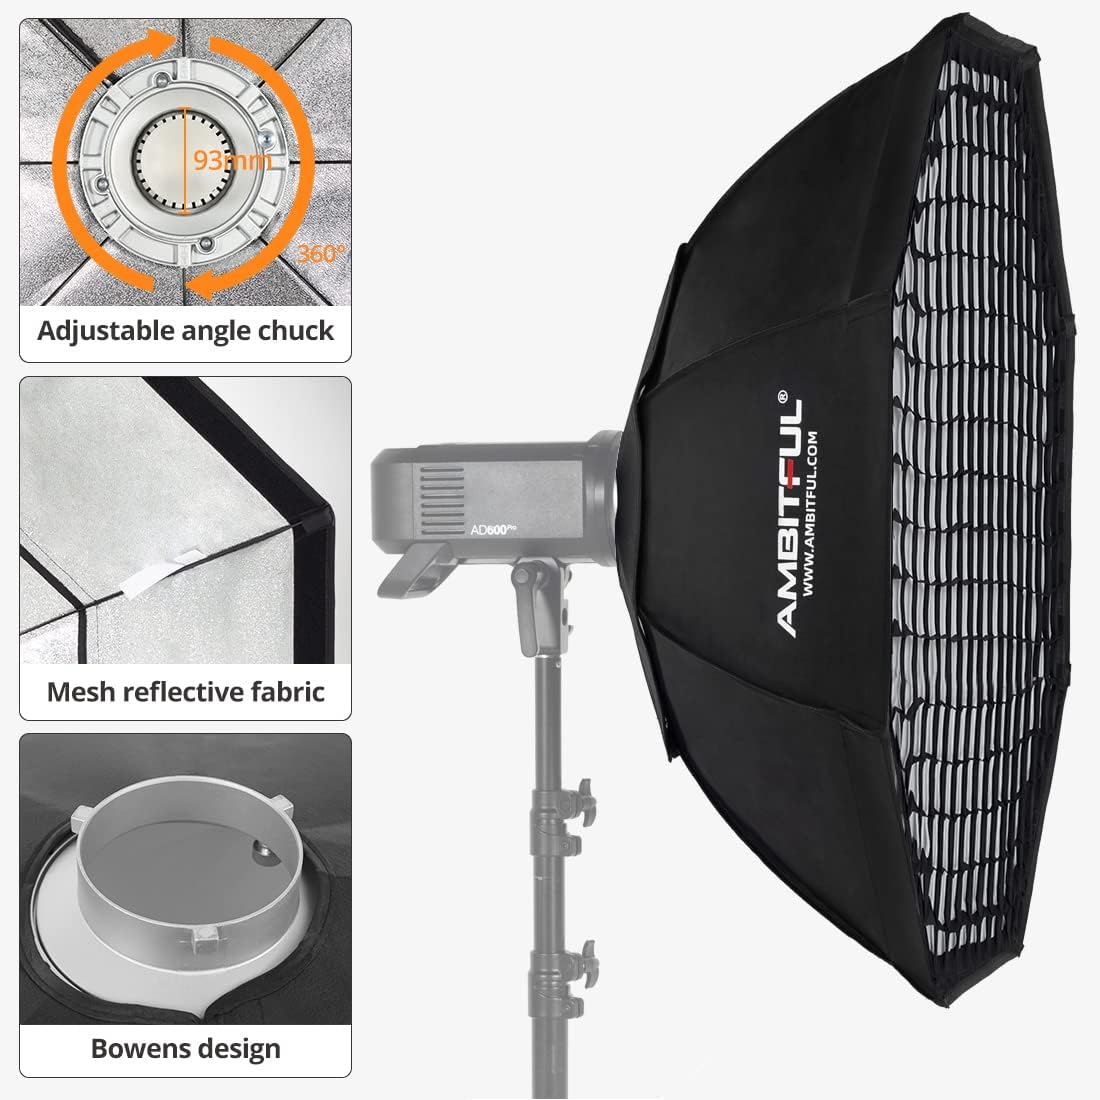 AMBITFUL 120cm Octagon Softbox with Honeycomb Grid & Bag for Bowens Mount